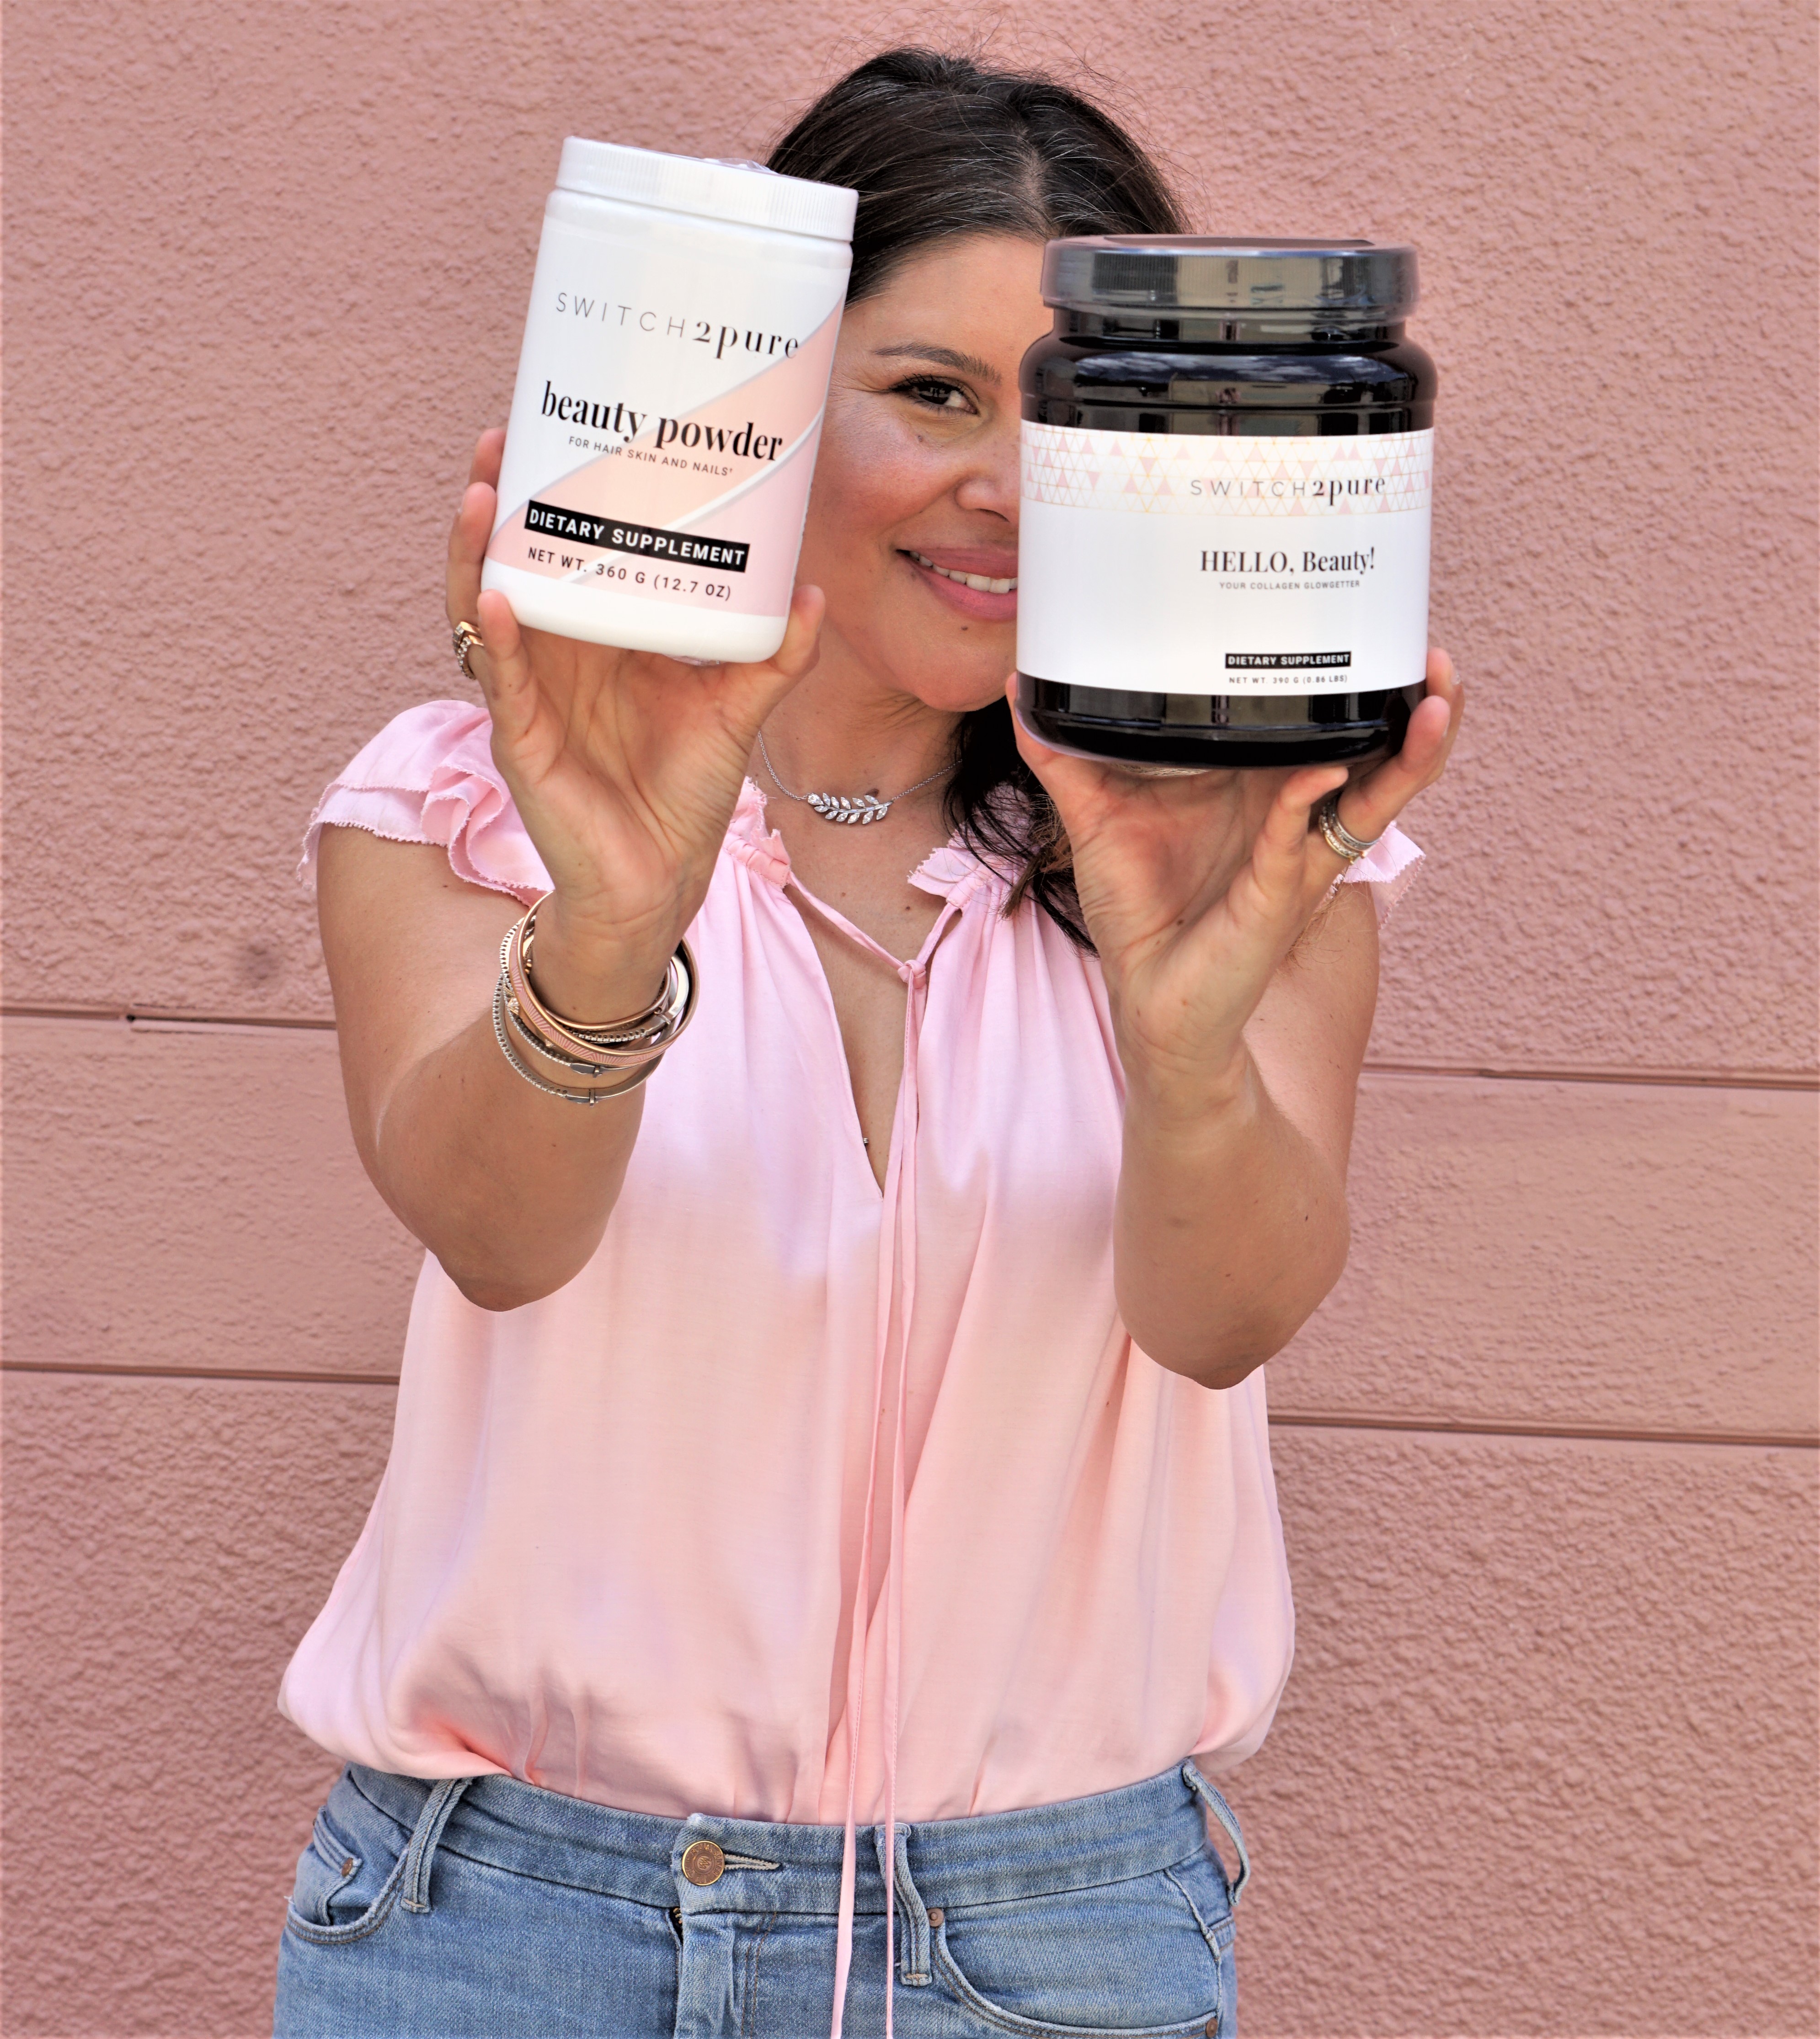 Switch2pure founder Estela Cockrell with switch2pure nutraceuticals Hello, Beauty collagen and beauty powder